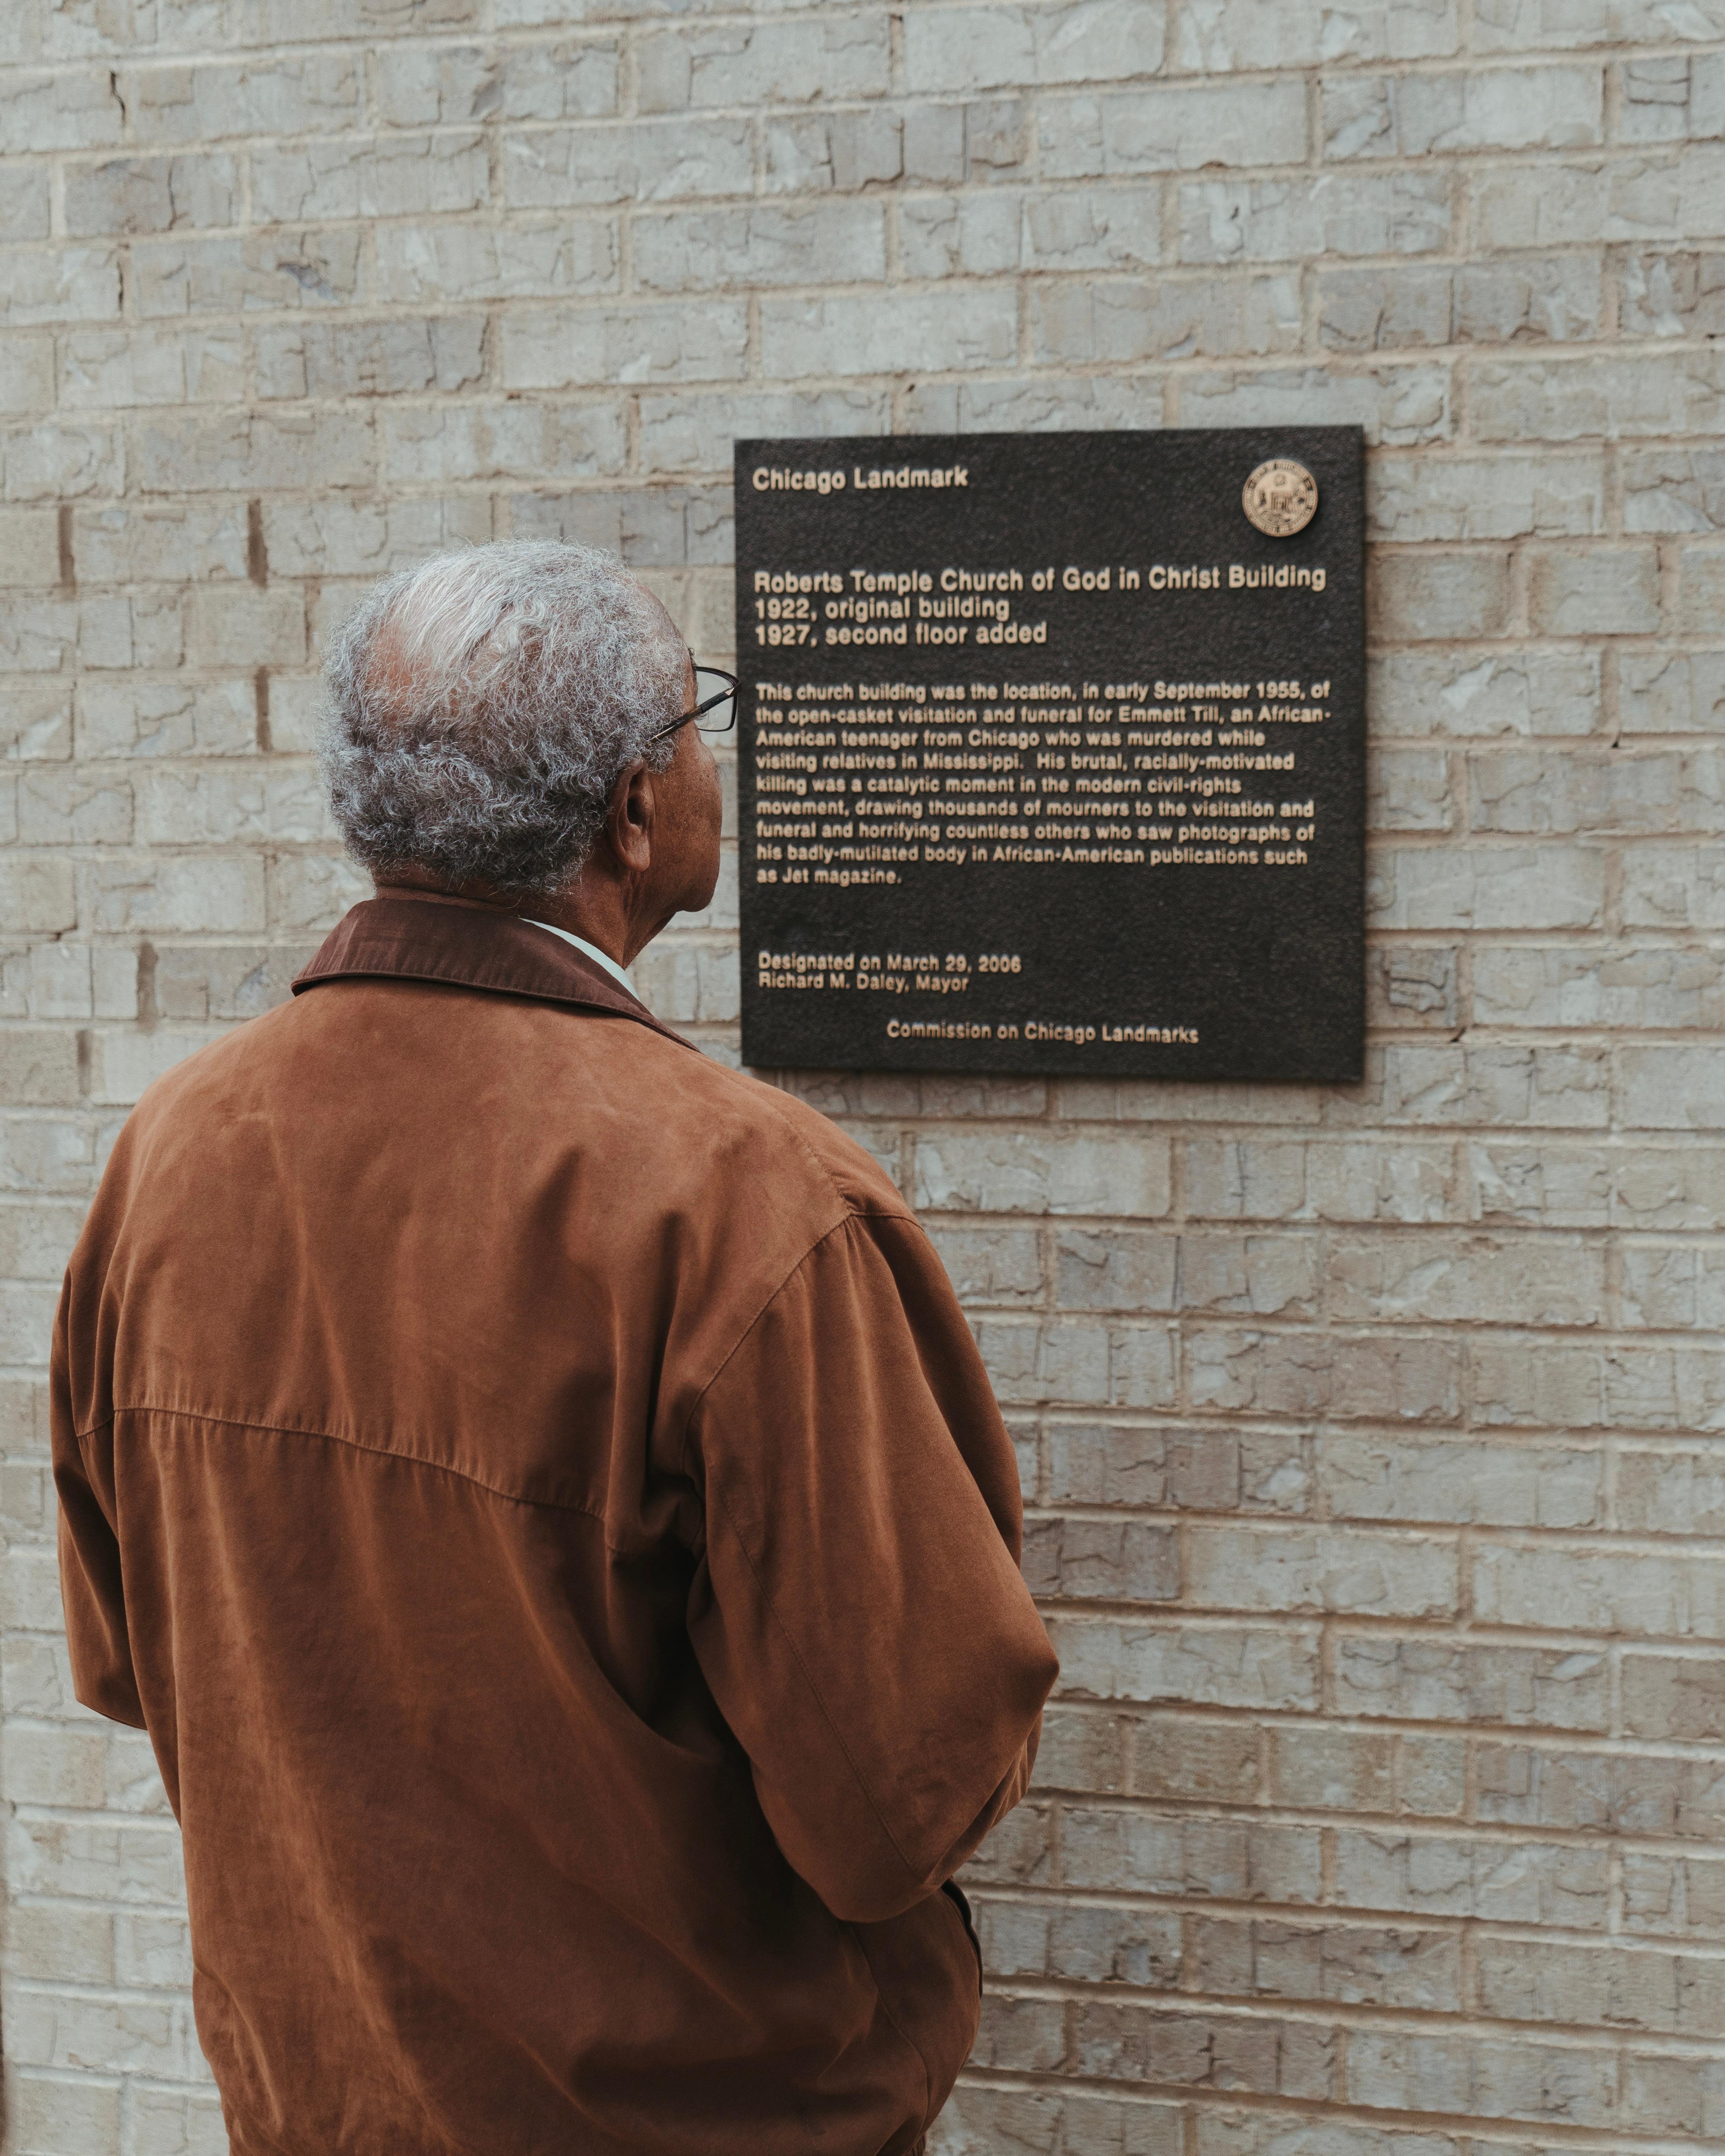 An elderly African American man looks at a plaque on the church exterior.